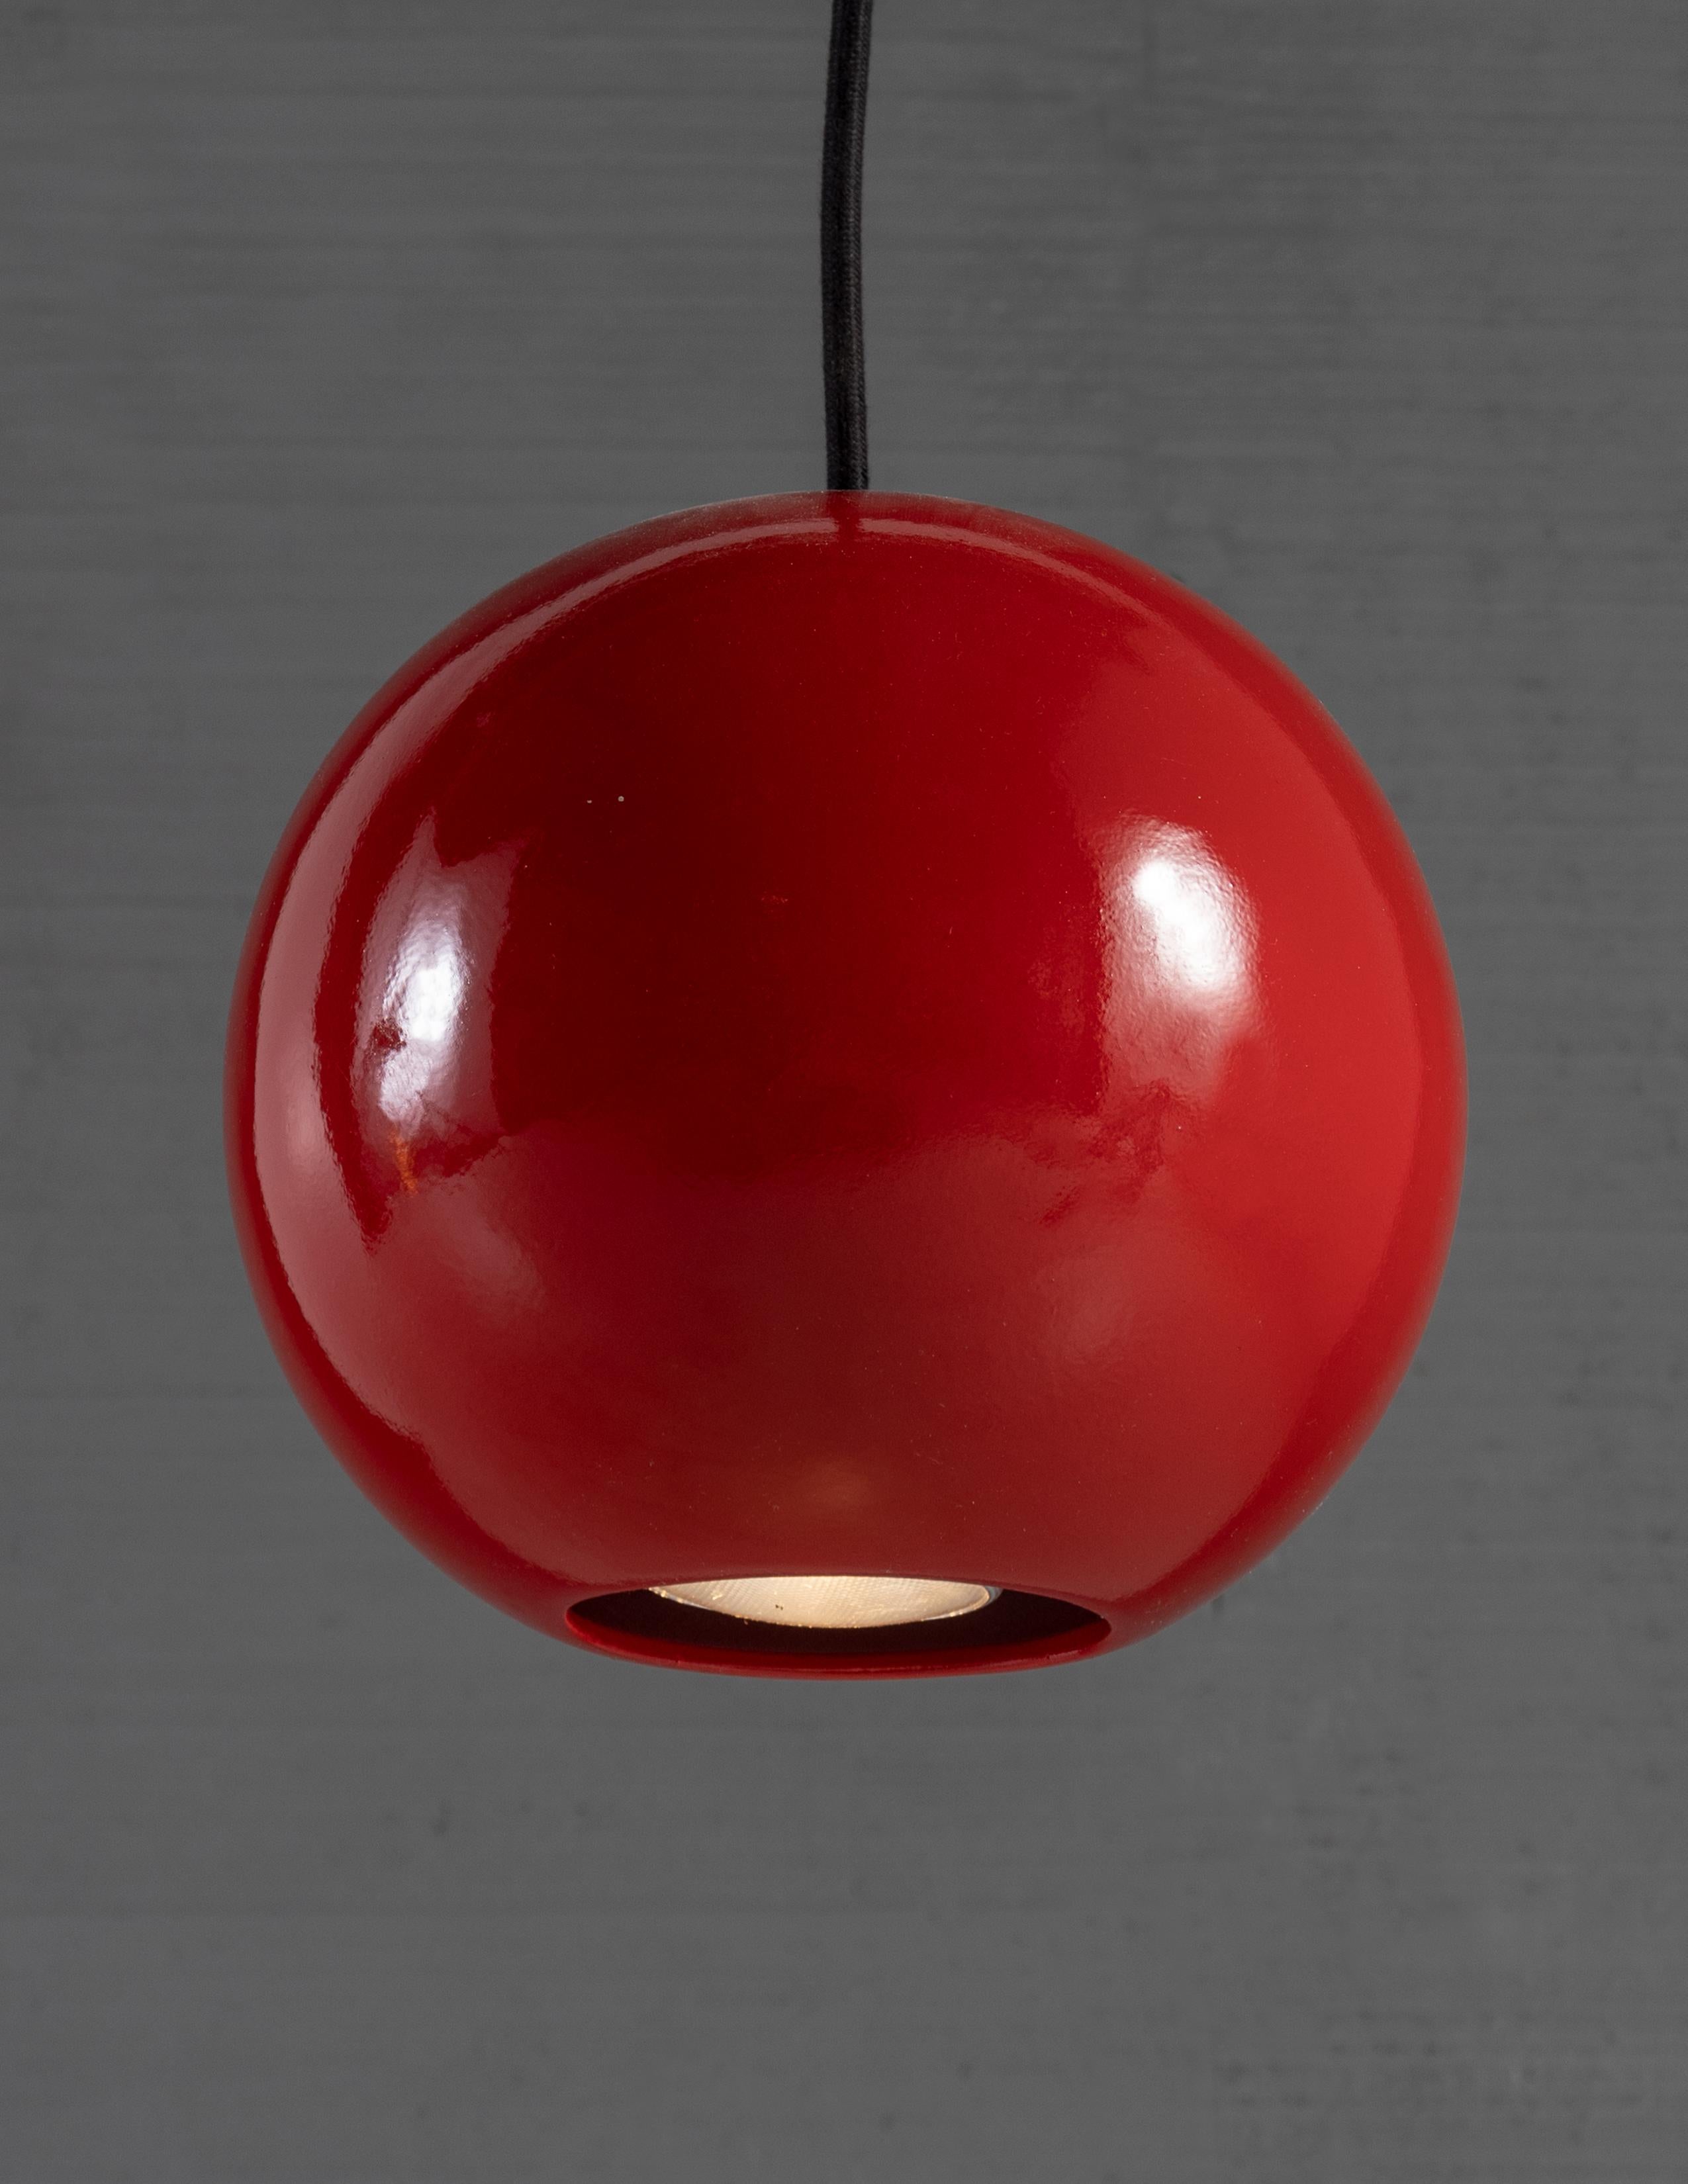 Ceramic ball form down light. Multiple colors, can be sold alone or as multiples. 

Custom canopy can be built in house.

Bulb 1 x LED only 7 watt parr 20. 5 lbs.

Handcrafted in Italy. Sold exclusively at Brendan Bass.

Minimum hanging height: